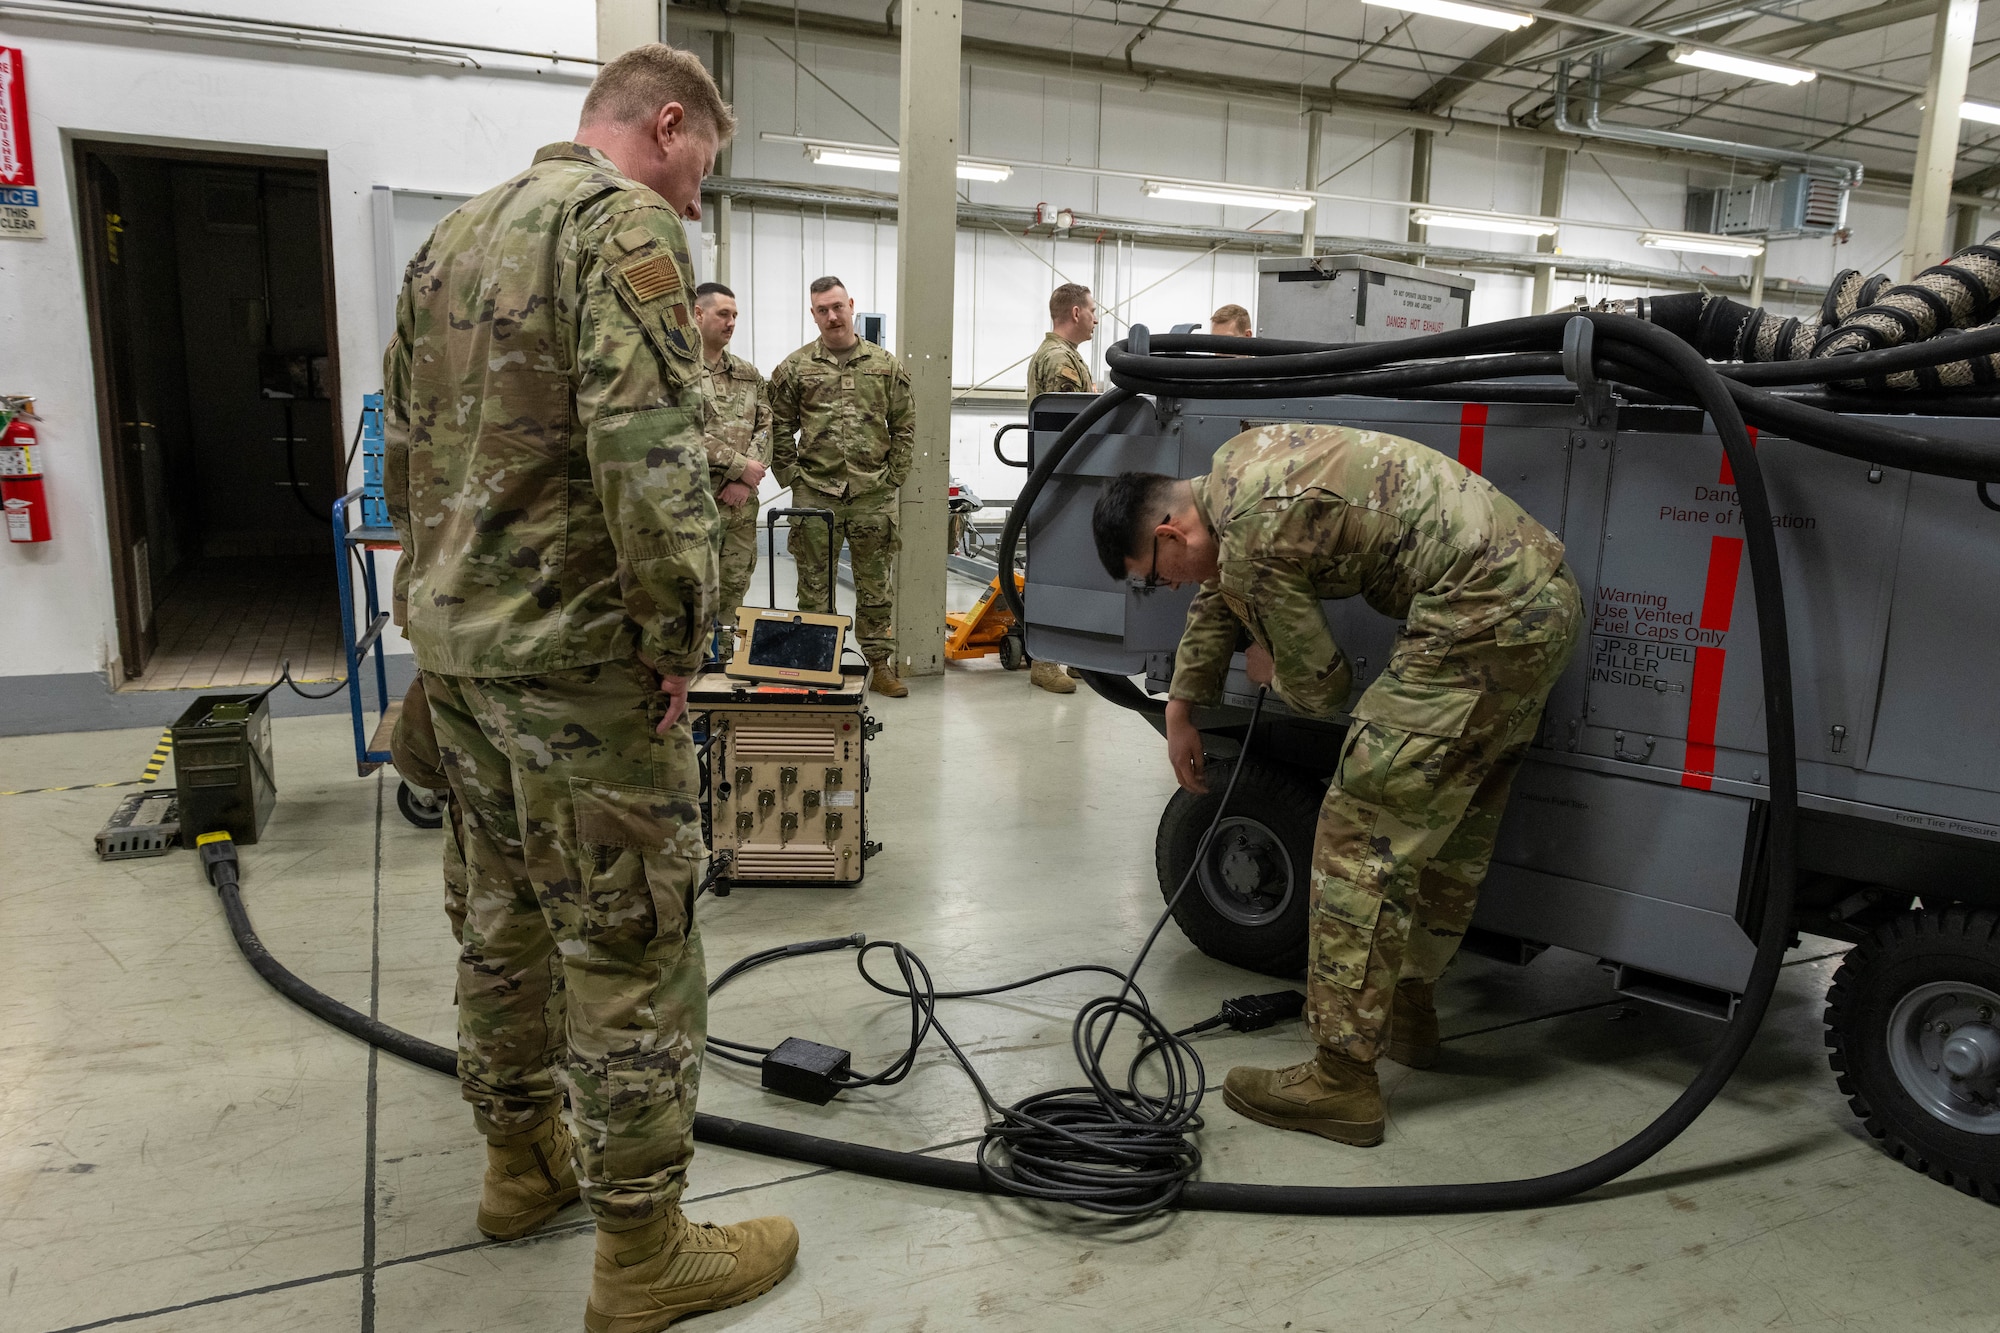 One man in military uniform shows another man in uniform how to plug a cable into a generator.